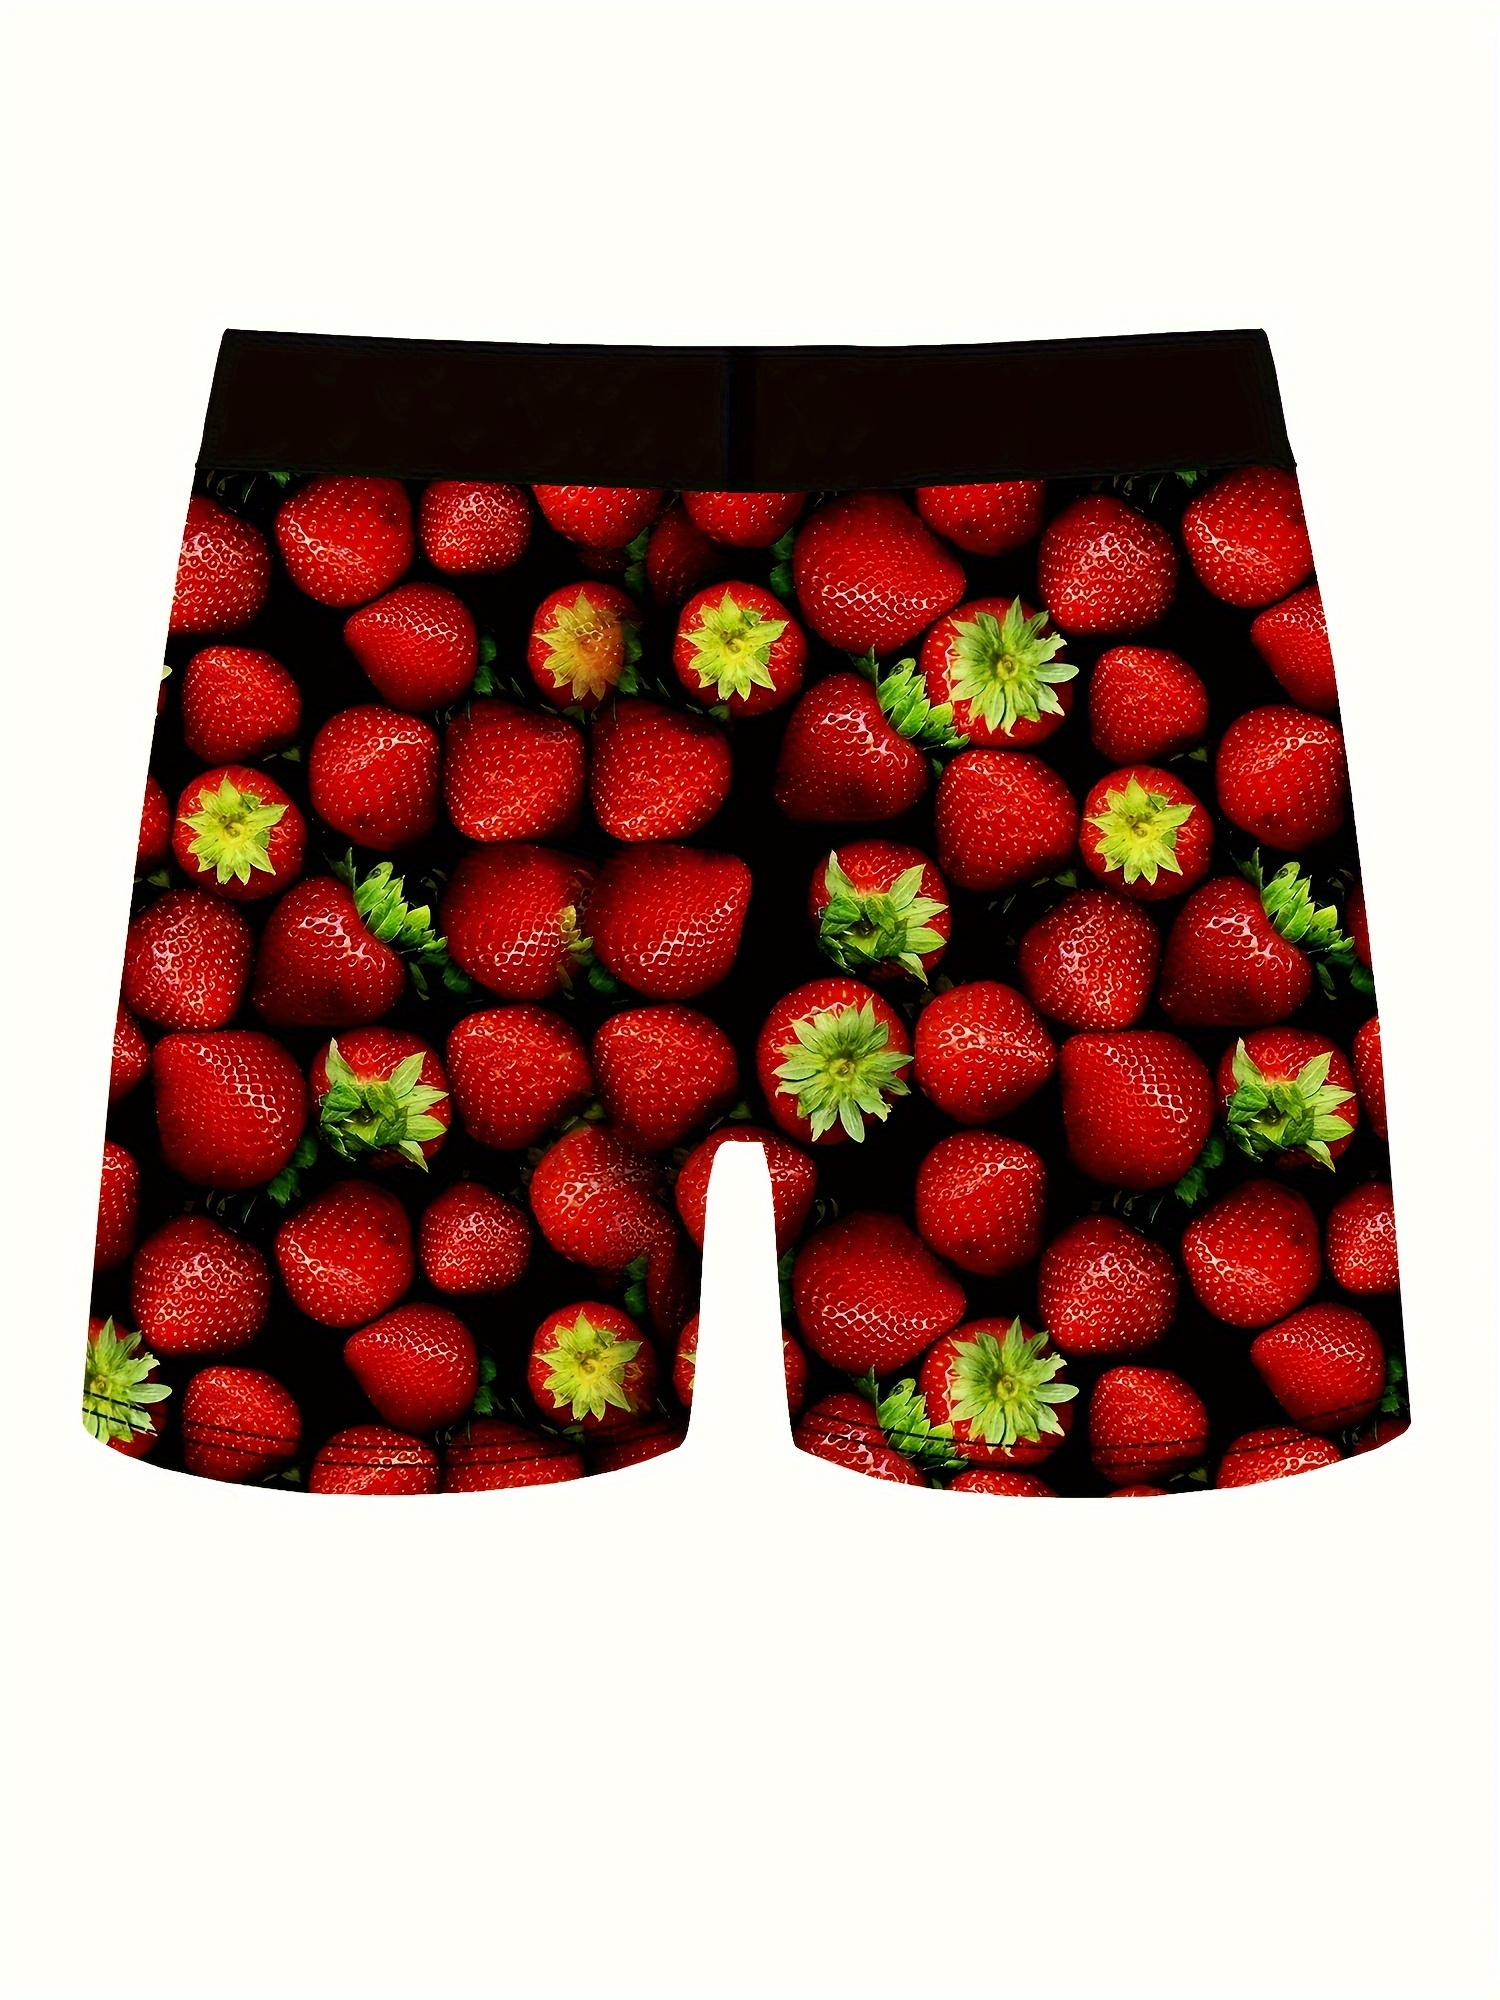 Funny Men's Boxer Briefs. the Man, the Legend Boxers, Gift for Him. Sexy  Men's Boxers, Novelty Gift for Him, Funny Men's Underwear, 